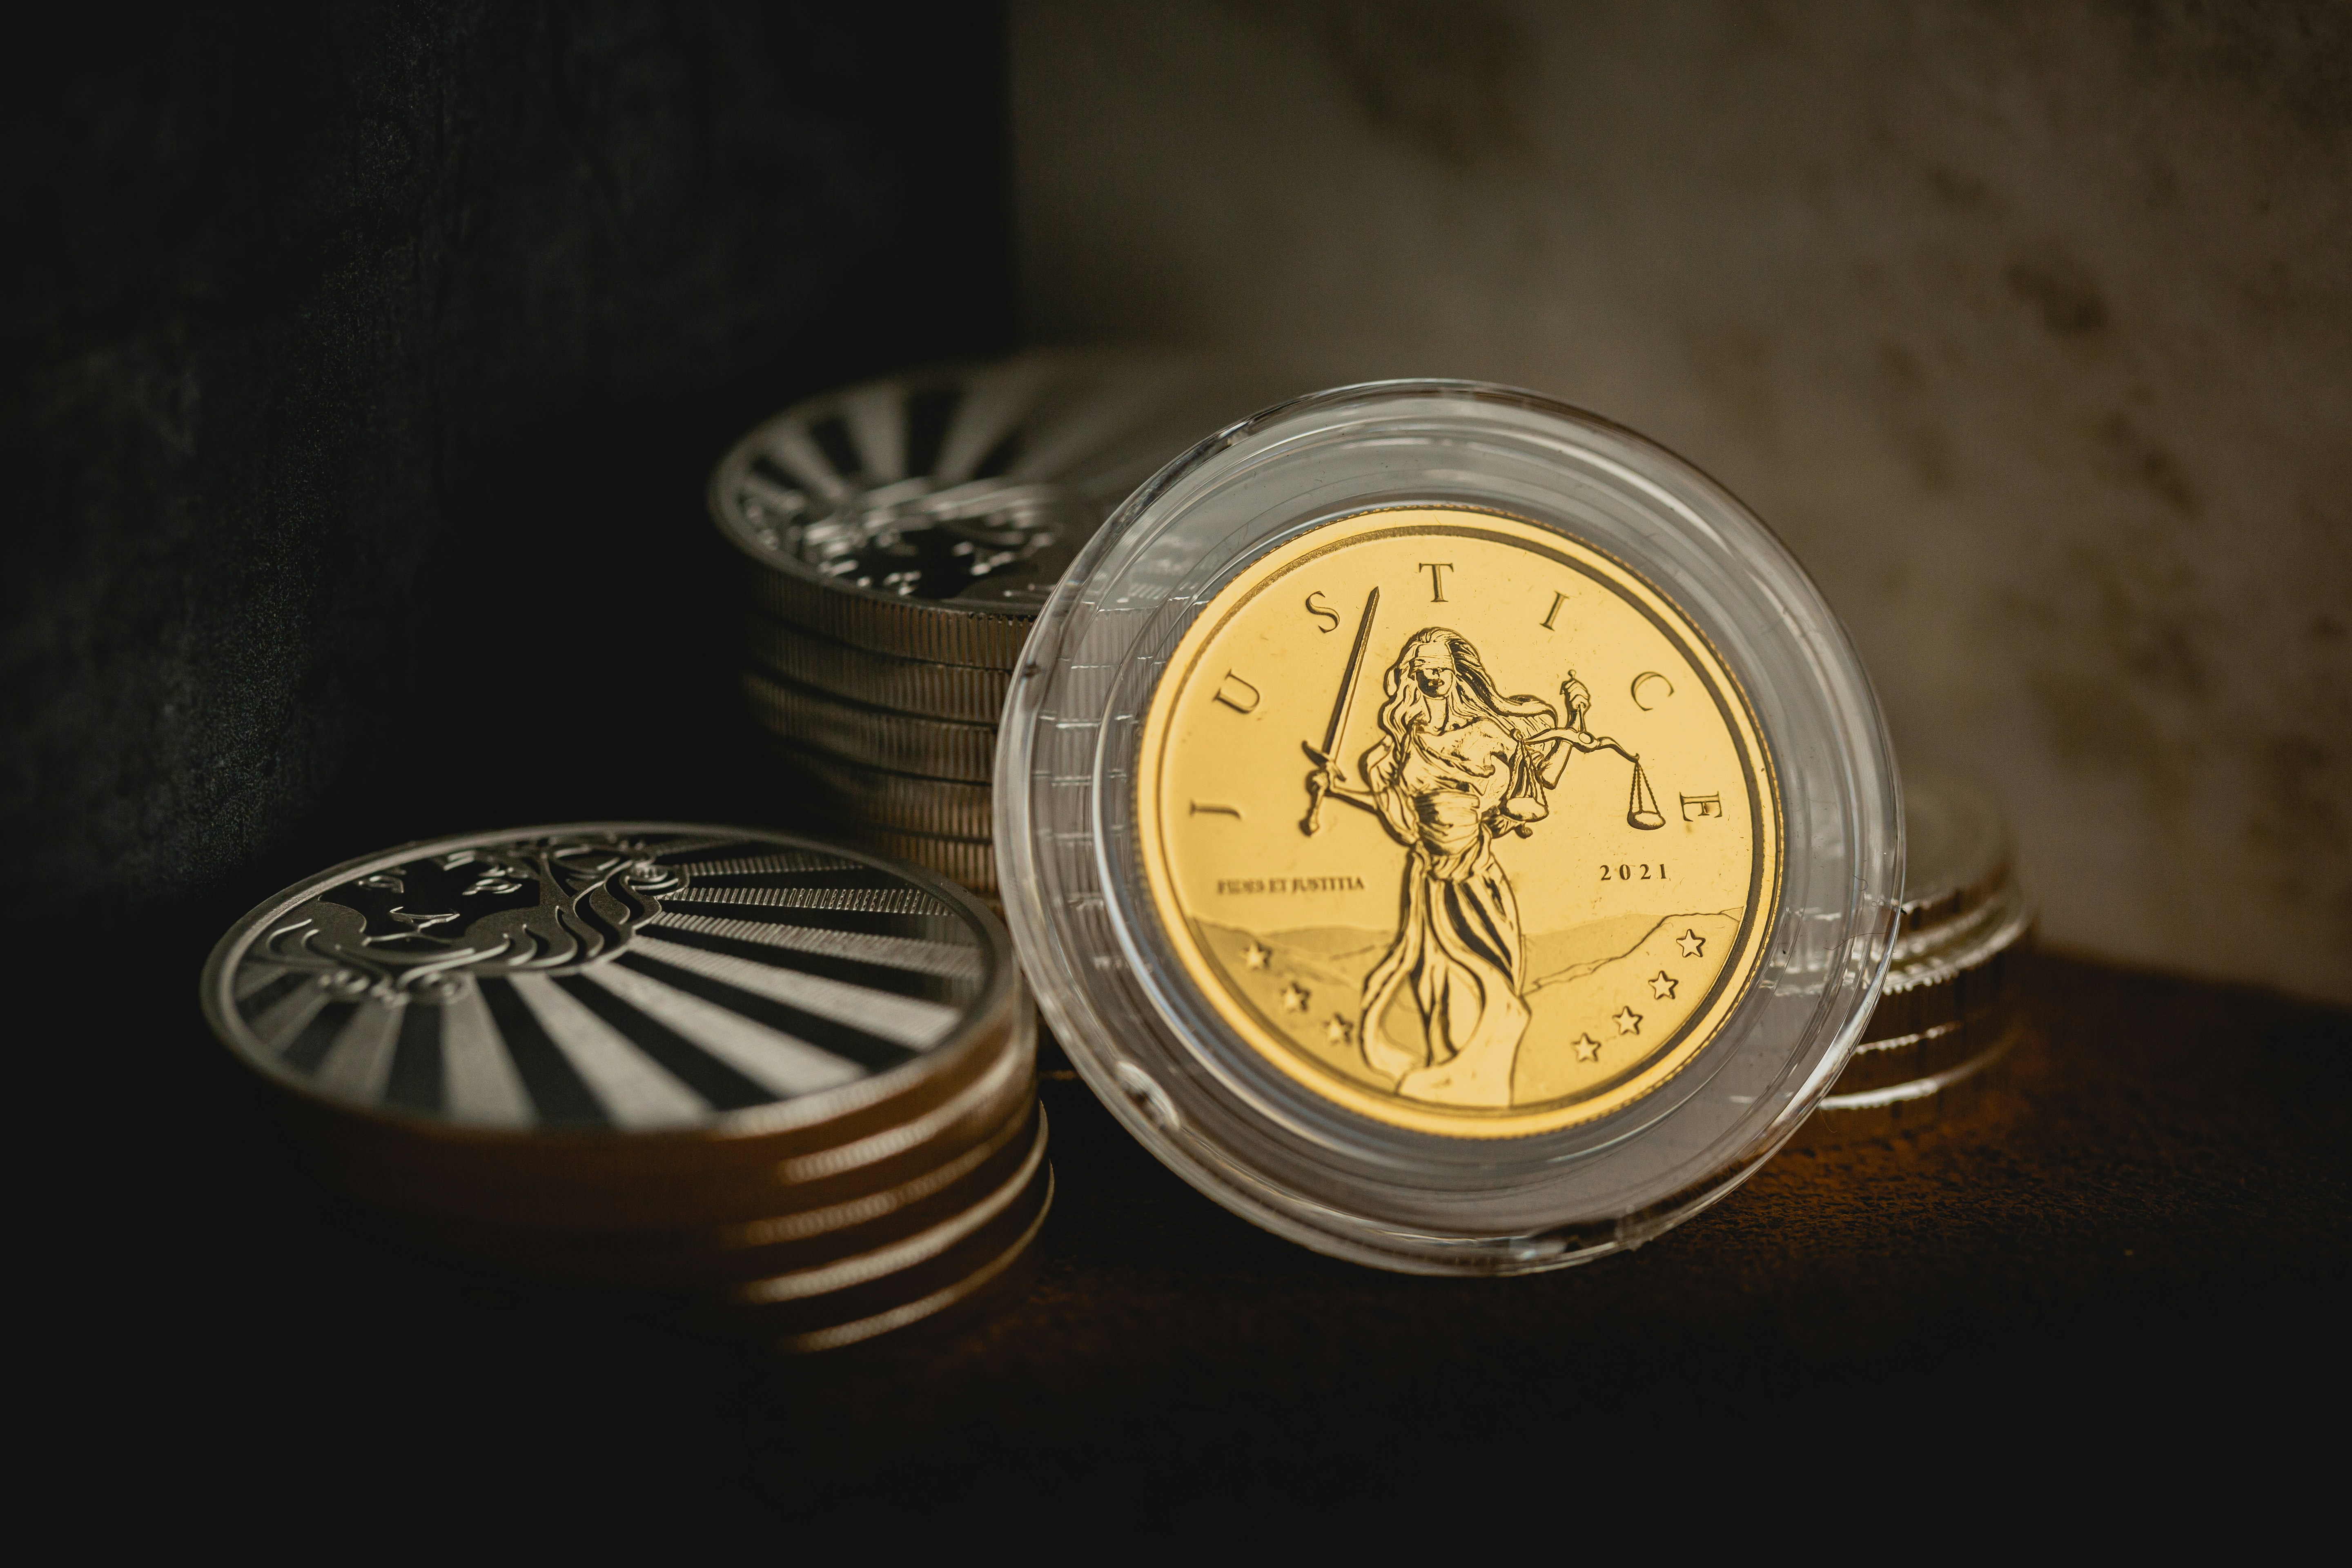 Scottsdale Silver stack of coins, rounds and bars sitting in a pile on a dark background featuring a 2021 Lady Justice Gold coin. Please give a shoutout to Scottsdale Mint if able! Shop online for the most beautiful bullion at ScottsdaleMint.com!